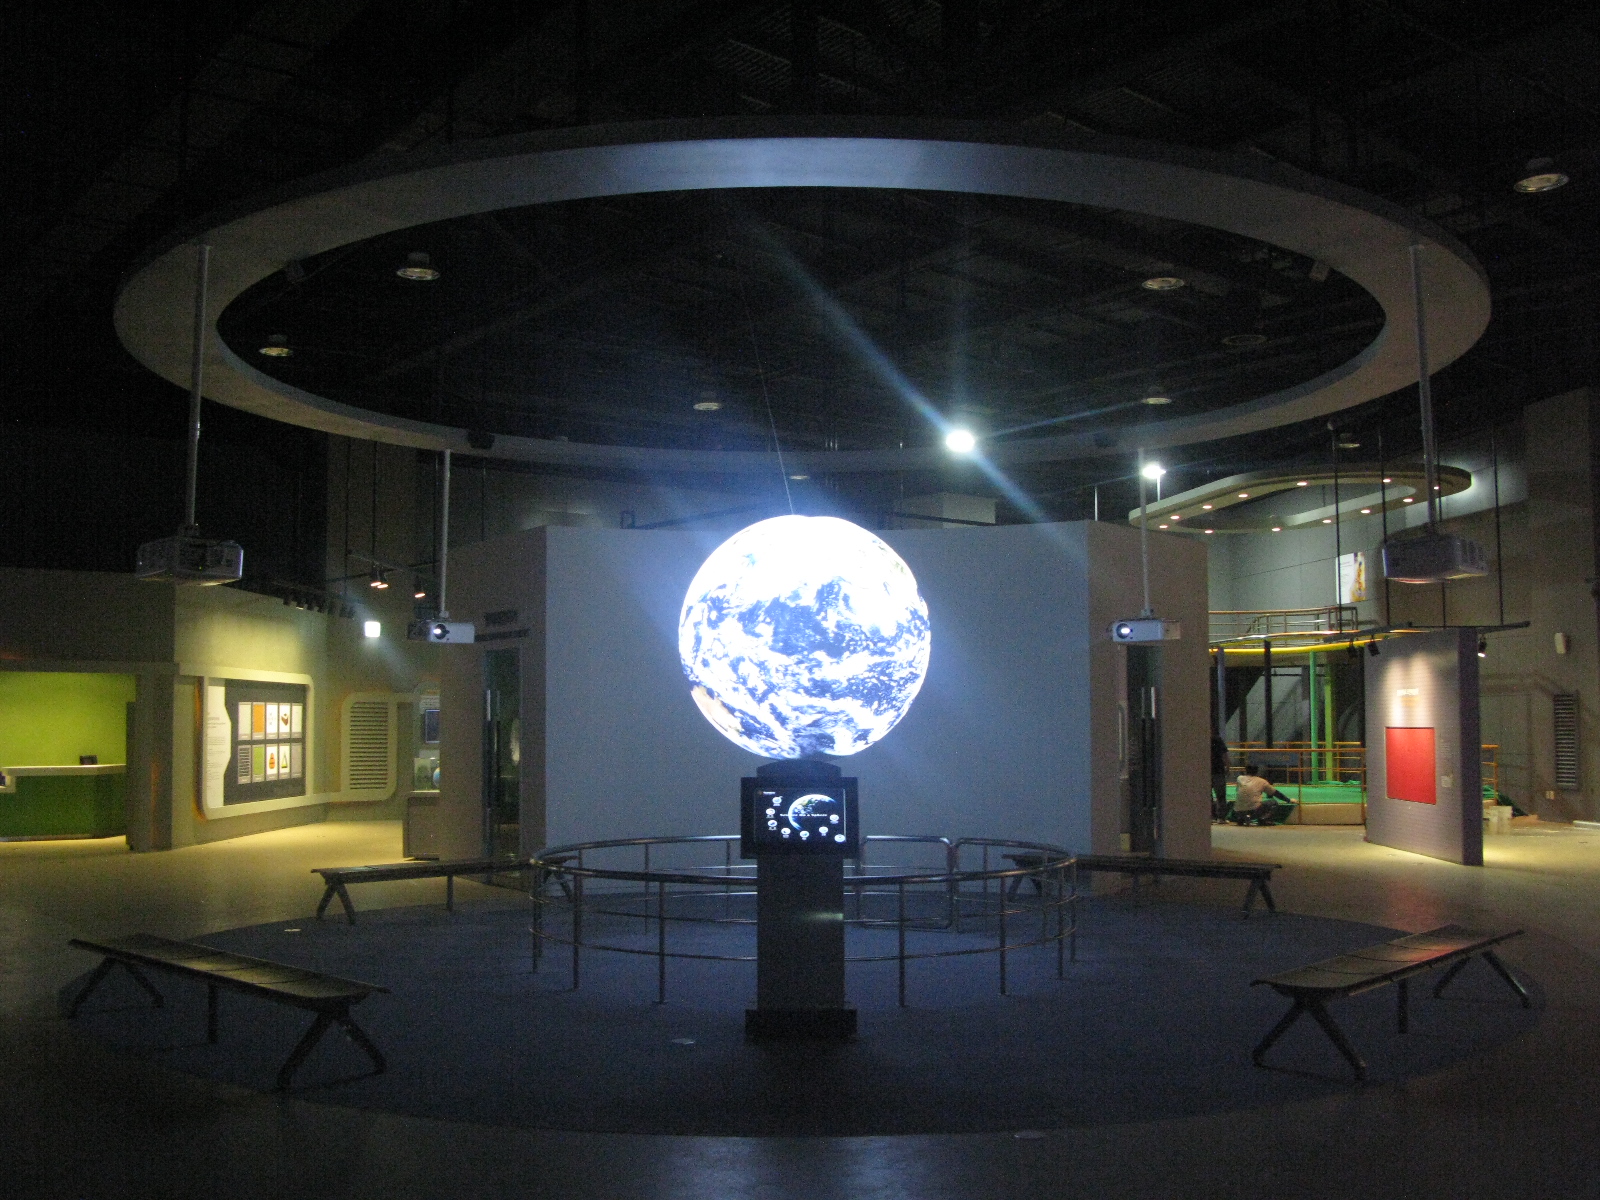 Science On a Sphere hangs in a large exhibit space. In the foreground is a touchscreen, and the Sphere is surrounded by four benches. Other exhibits are visible in the background